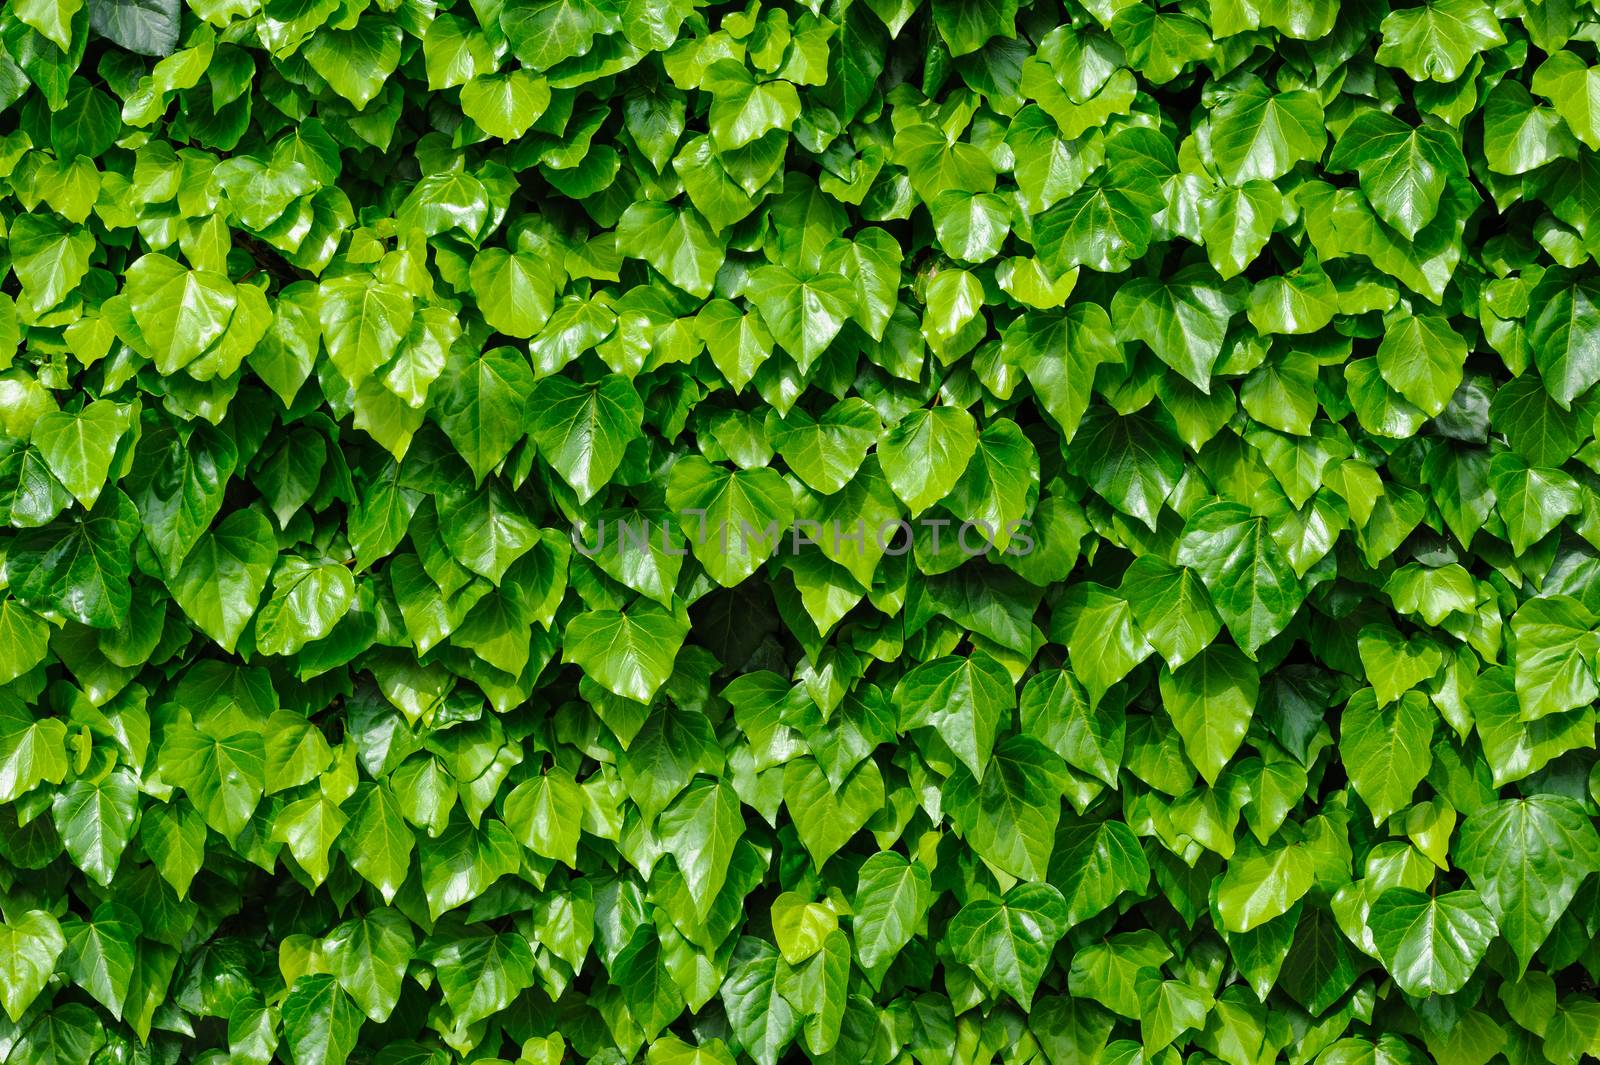 Spring green lush ivy leaves wall background